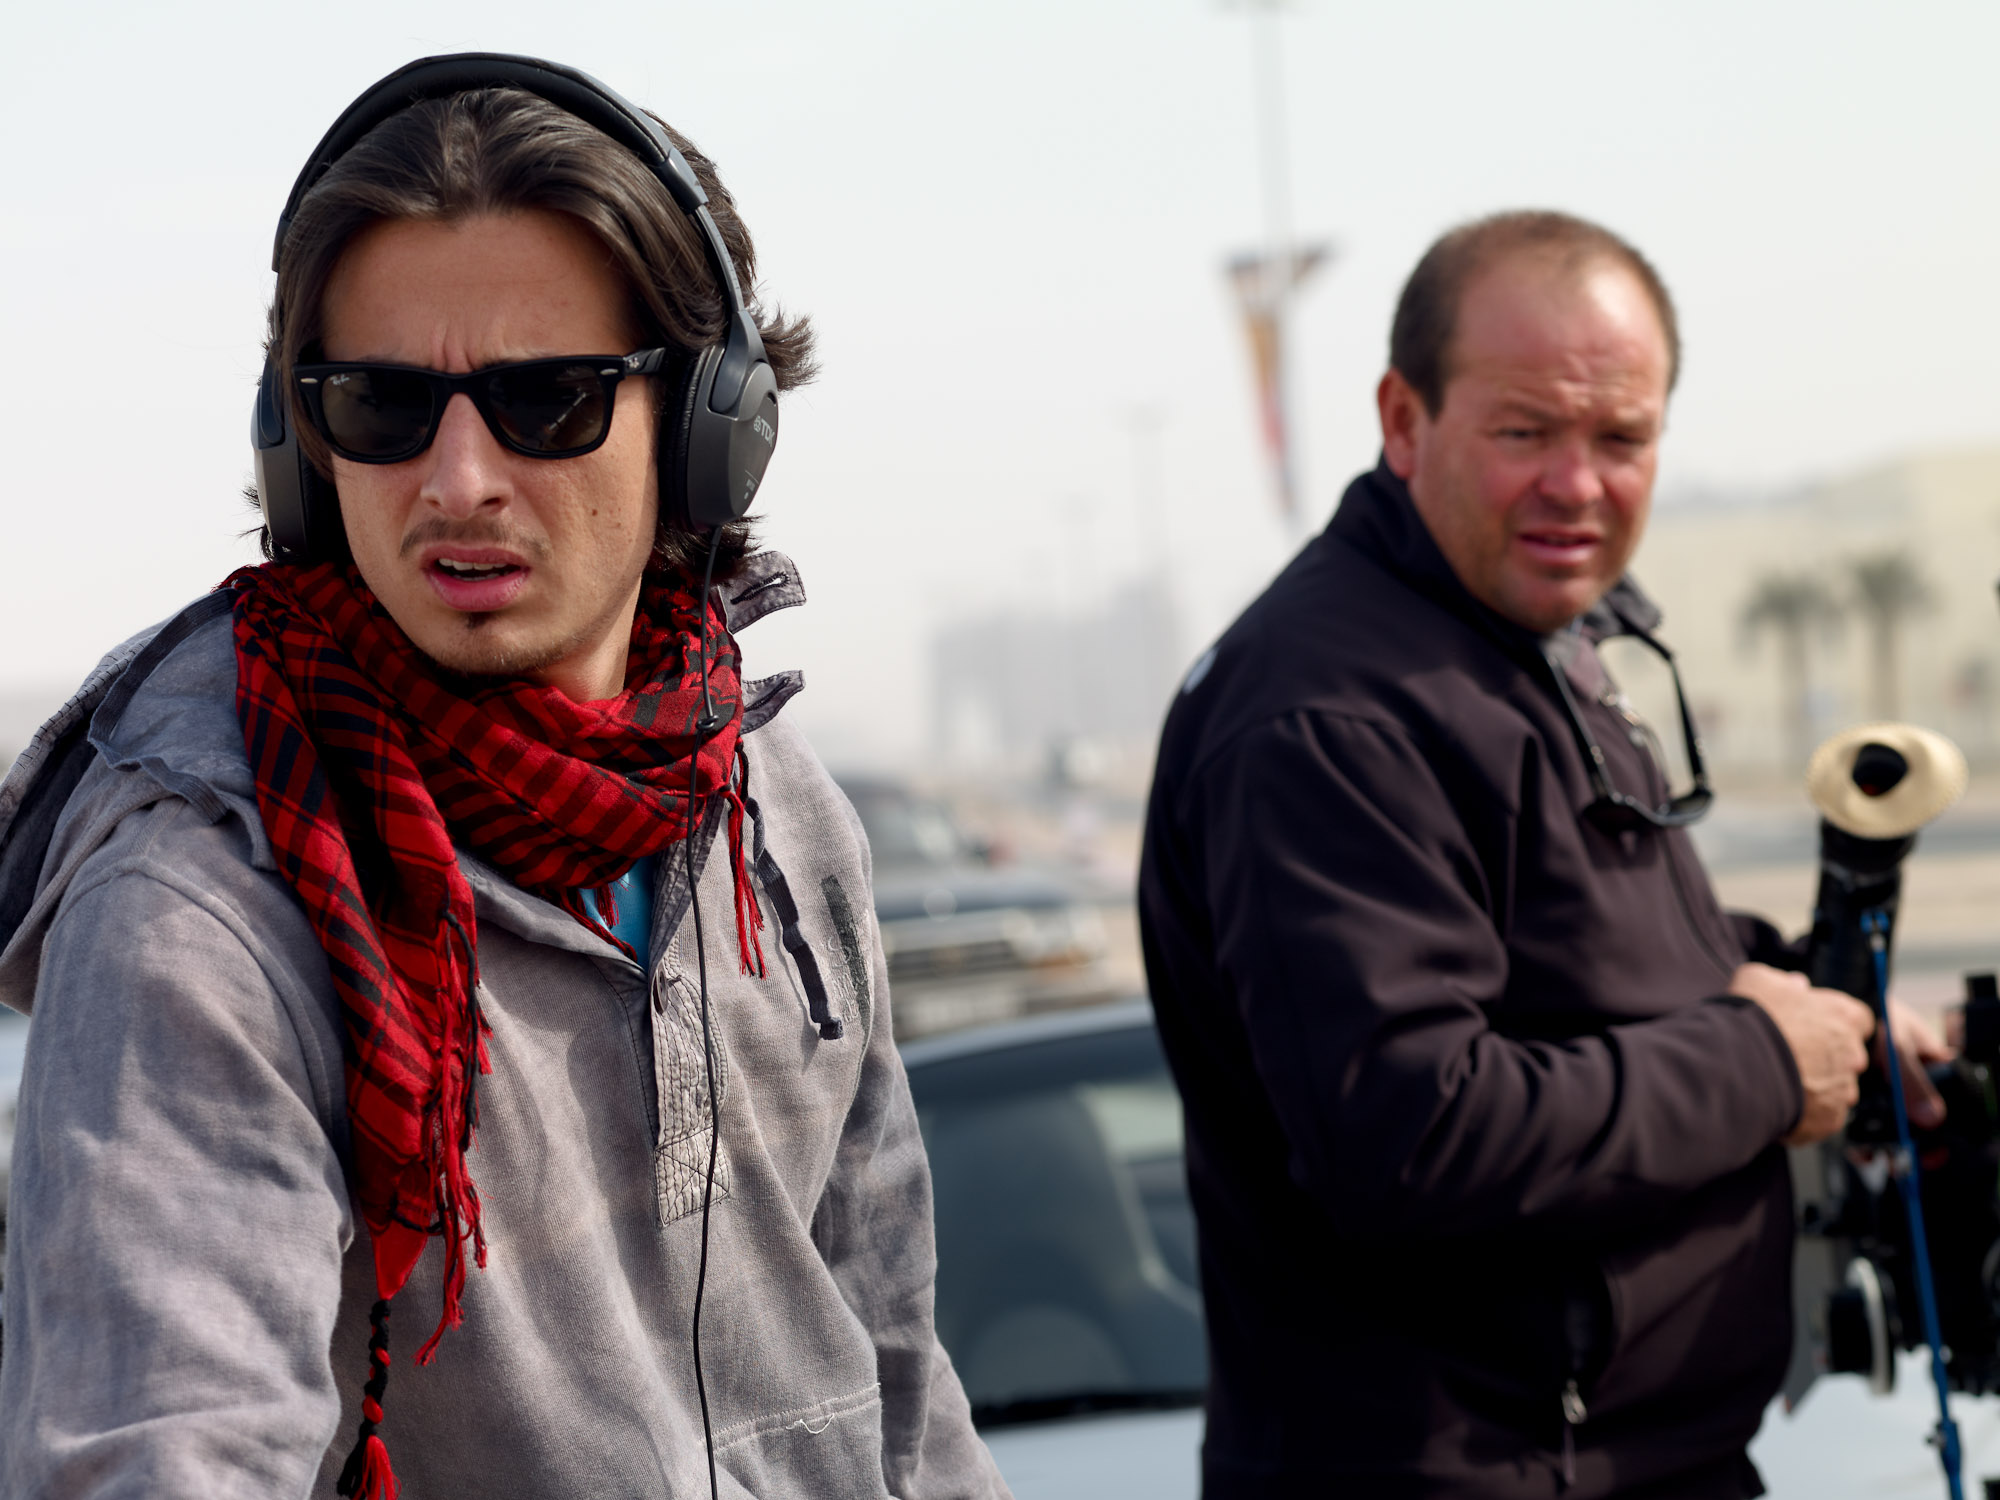 Director Ali F. Mostafa with cinematographer Michael Brierley on set of City of Life. 2009